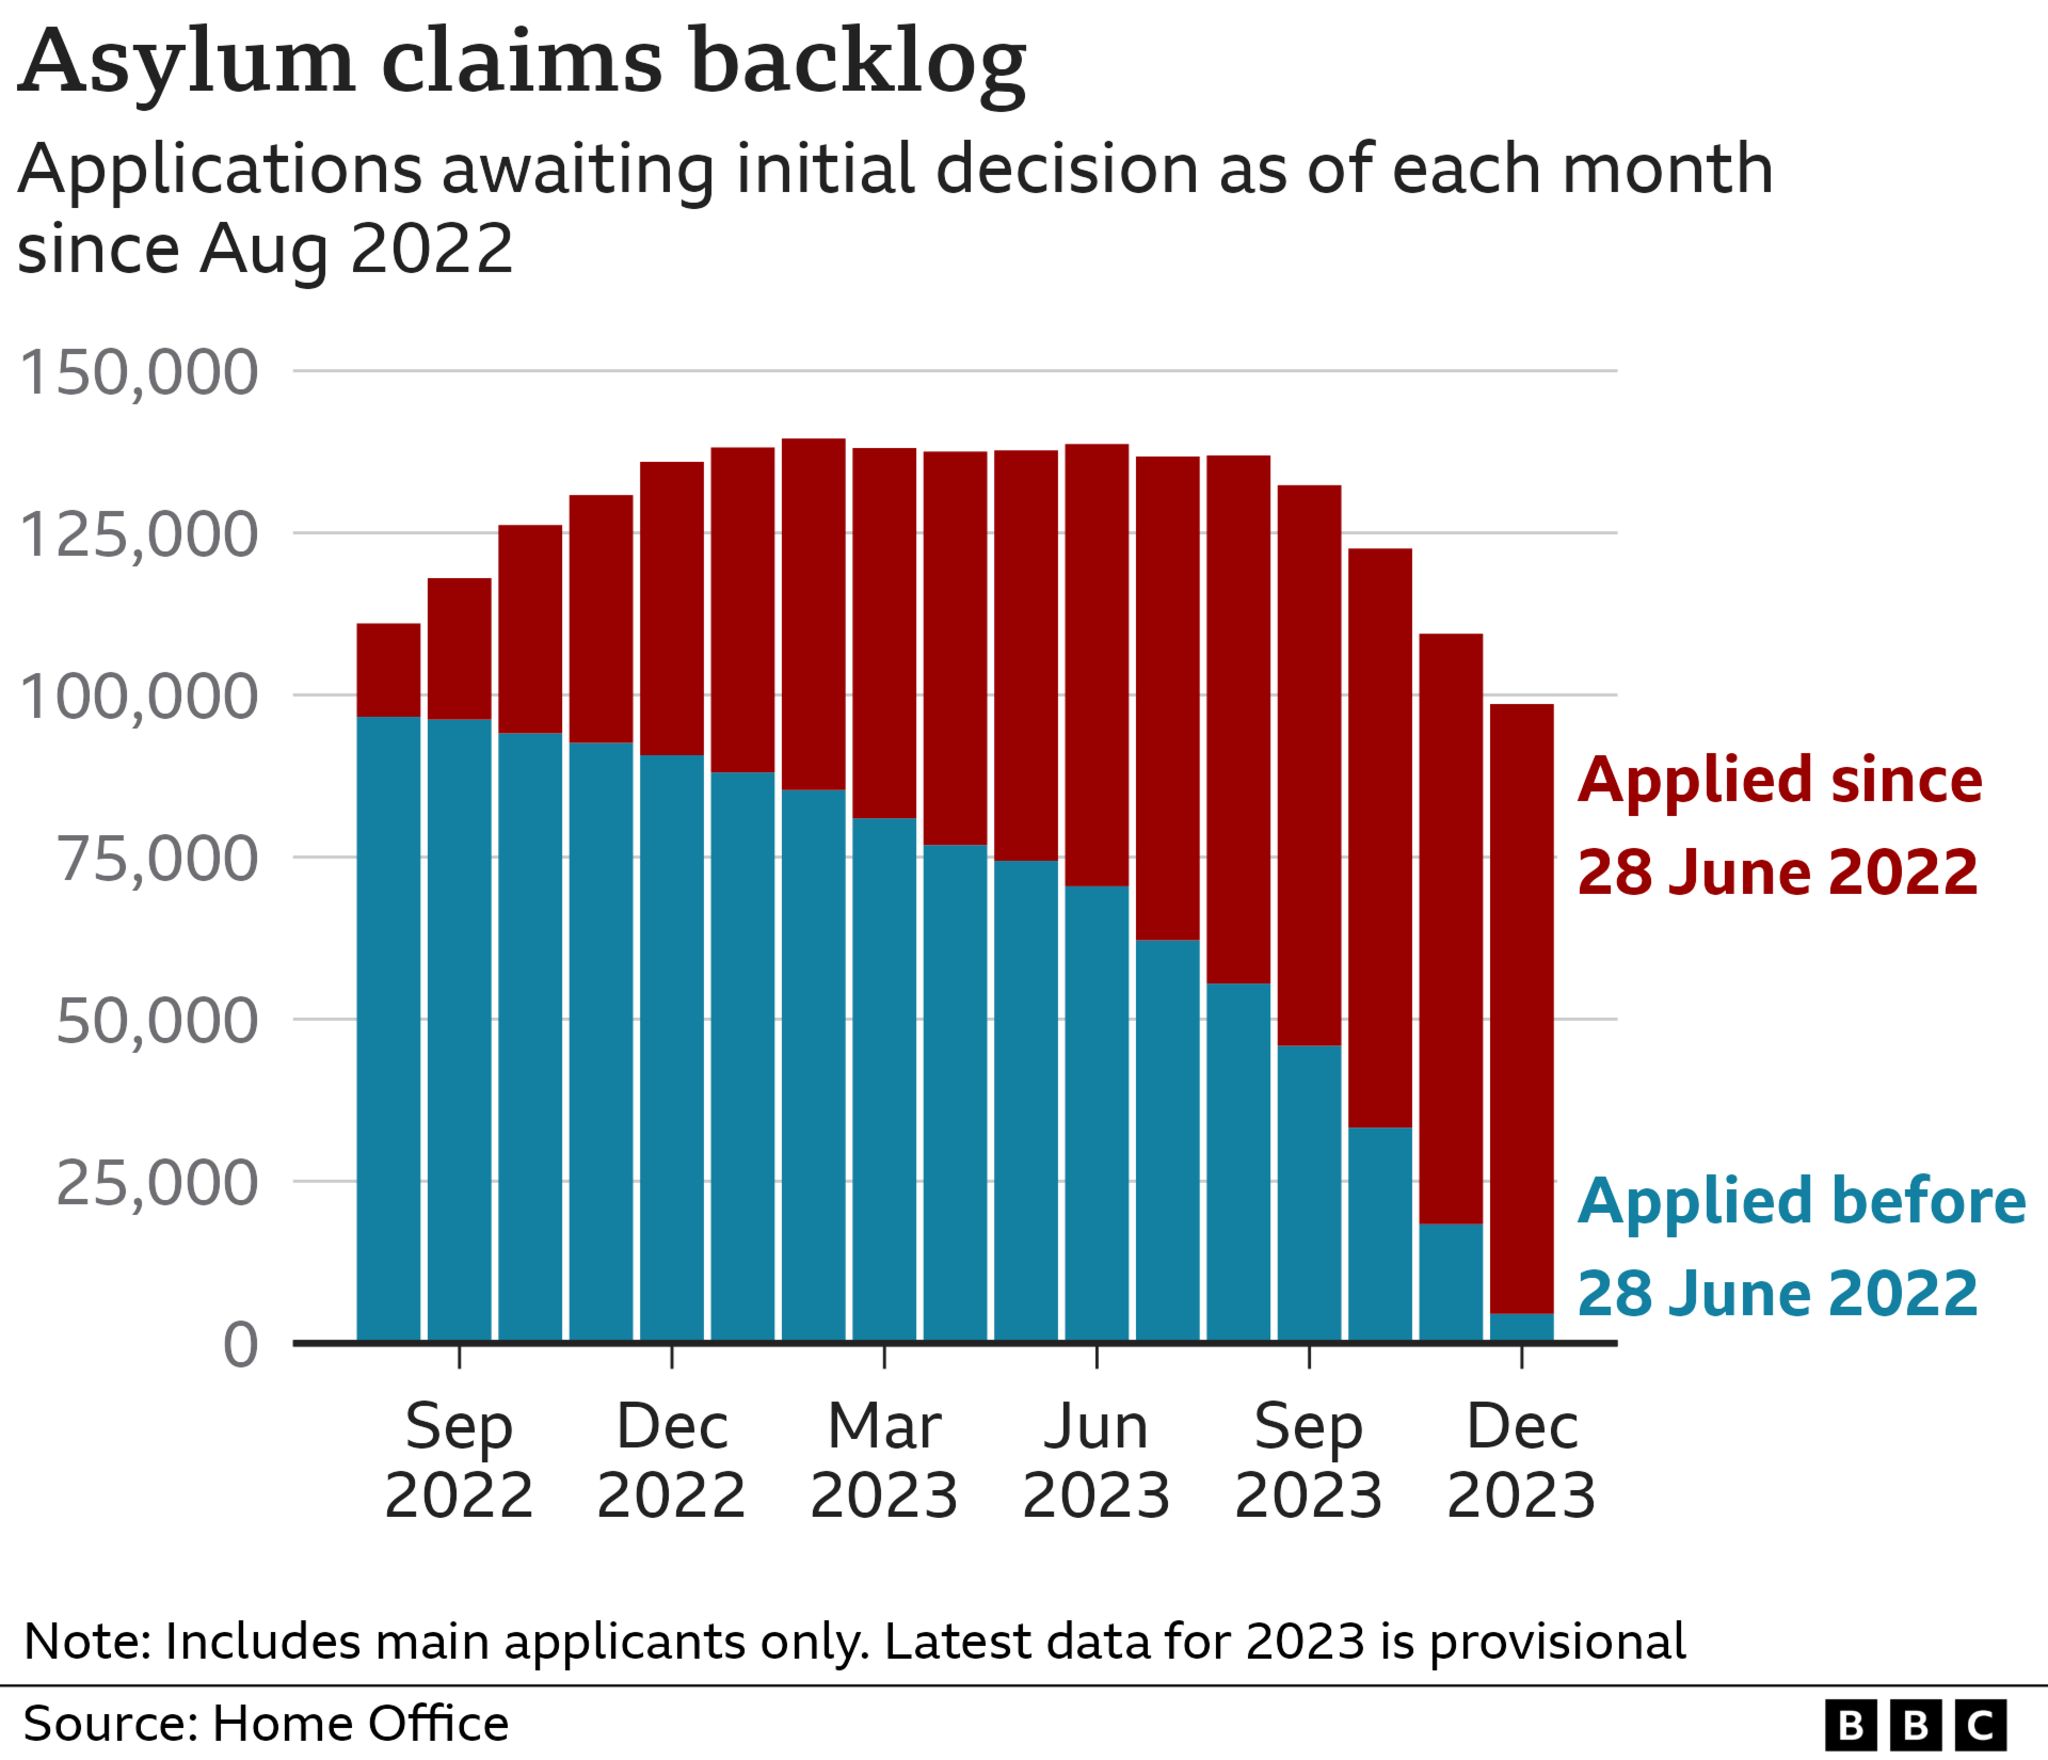 Chart showing the numbers of applications awaiting an initial decision, divided into those who applied for asylum before and after 28 June 2022